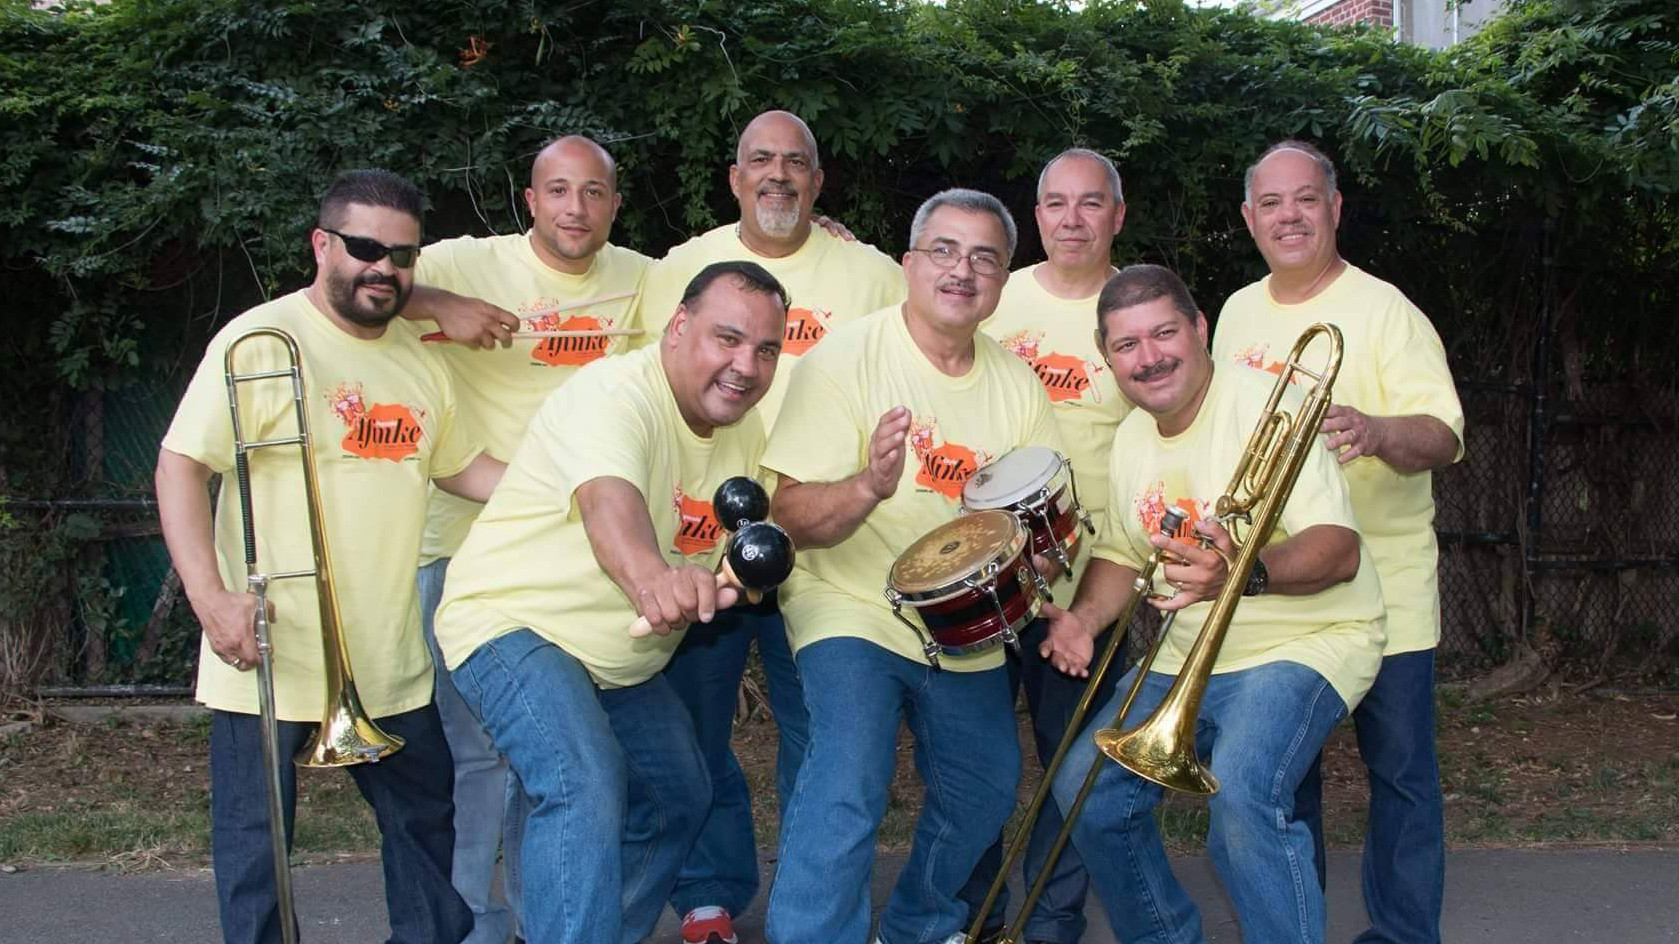 band members of Orquesta Afinke posed with their instruments and smiling